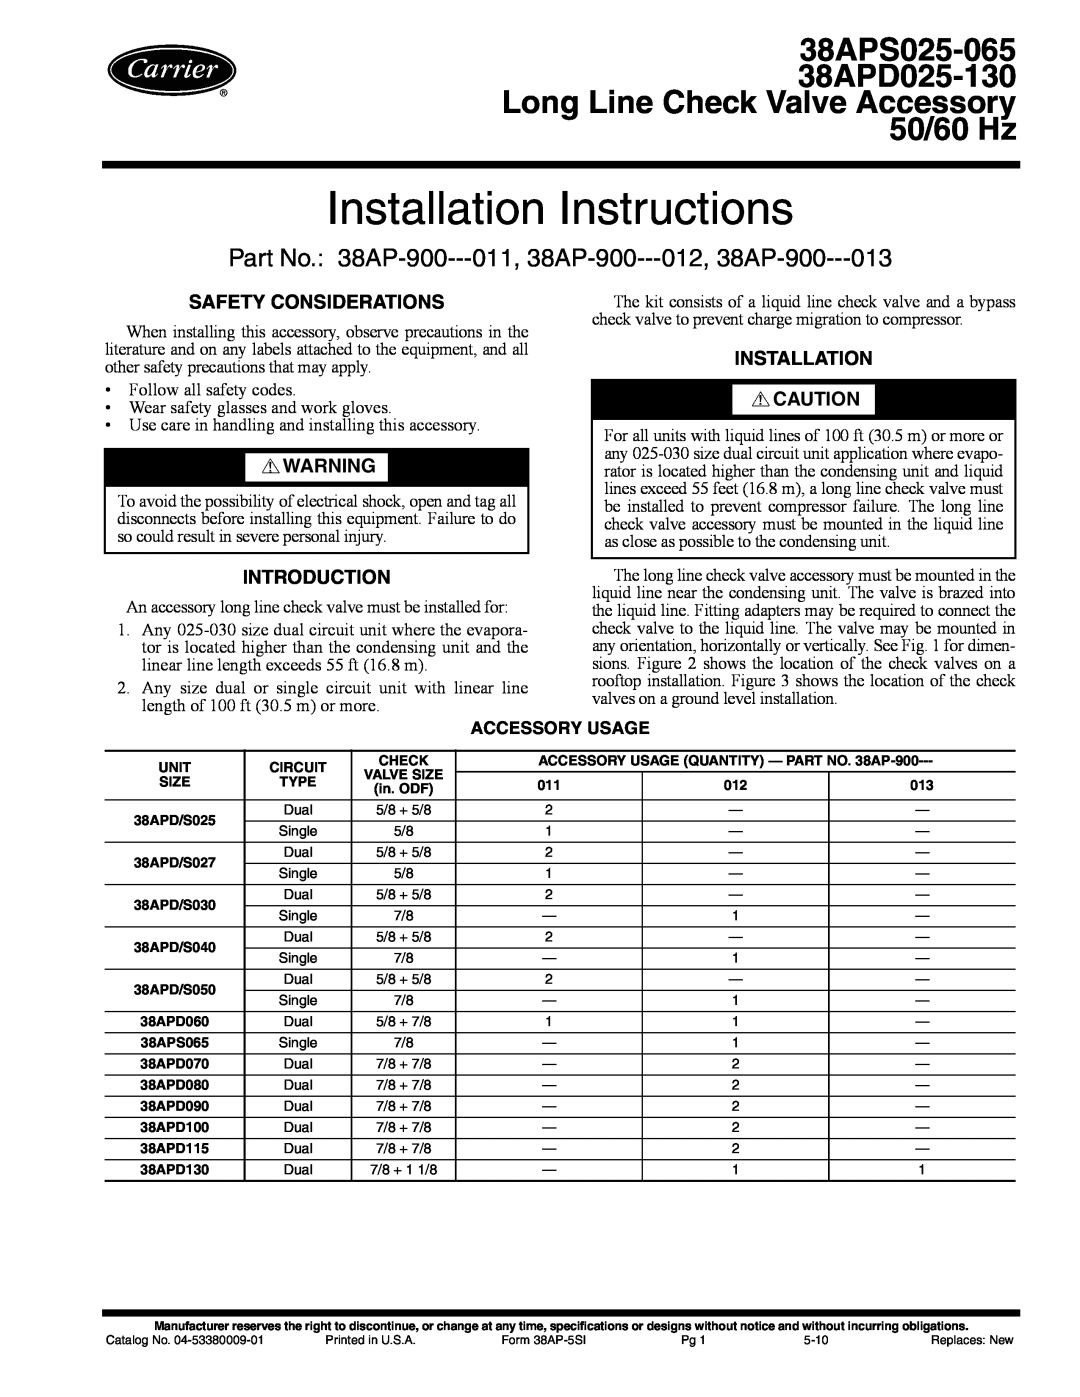 Carrier 38APS025-065 installation instructions Accessory Usage, Installation Instructions, Safety Considerations 